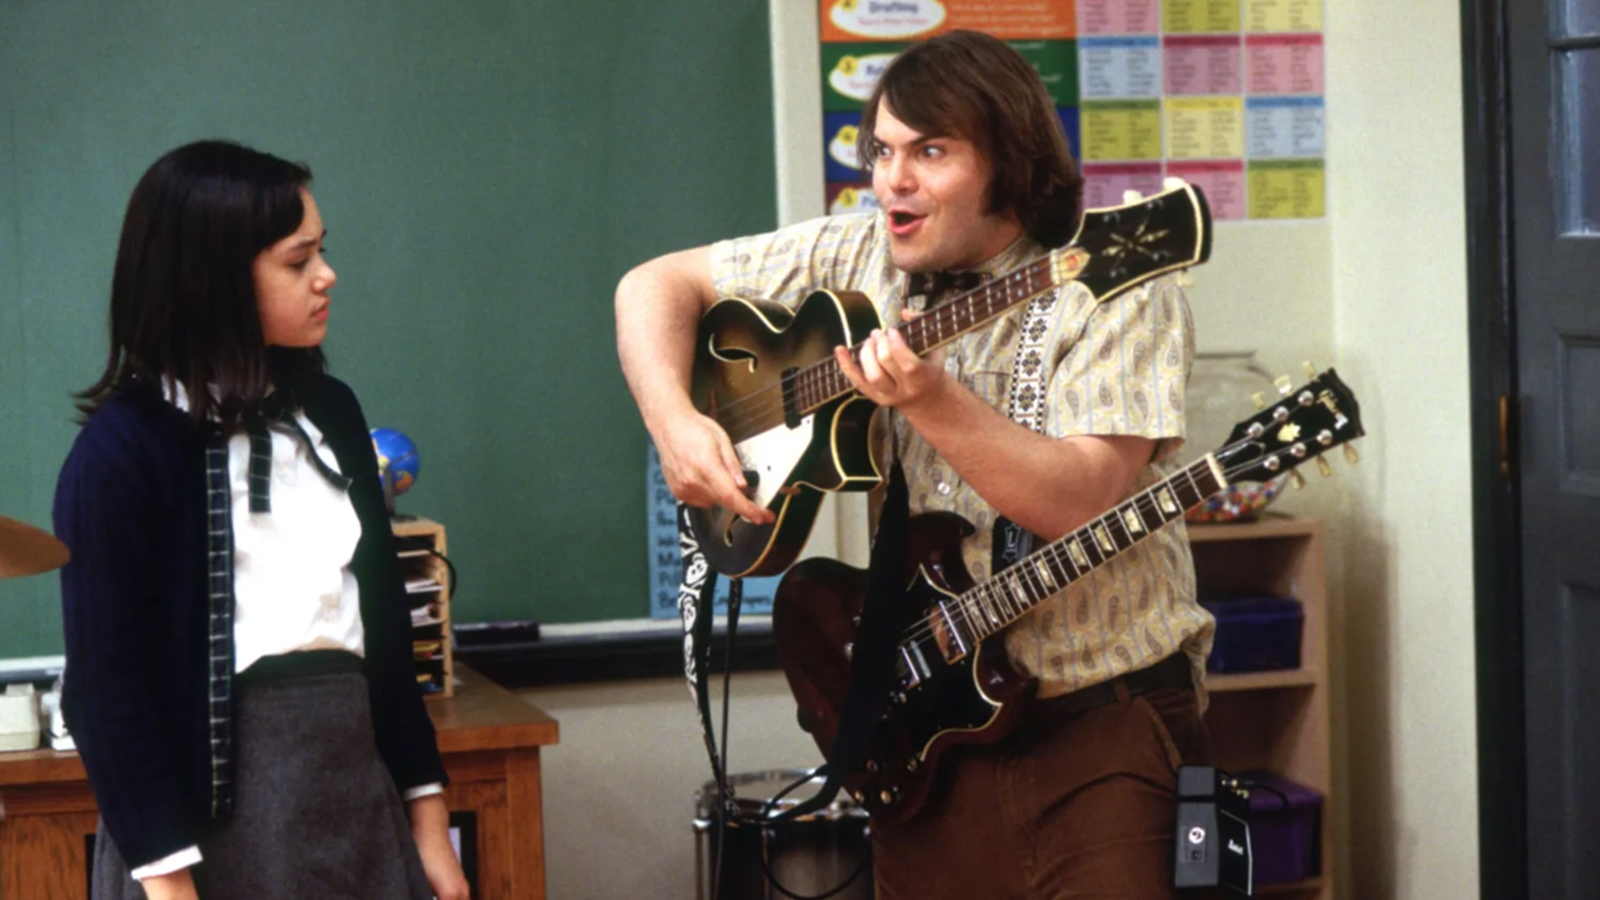 Jack Black Says He's 'Ready' to Make 'School of Rock' Sequel